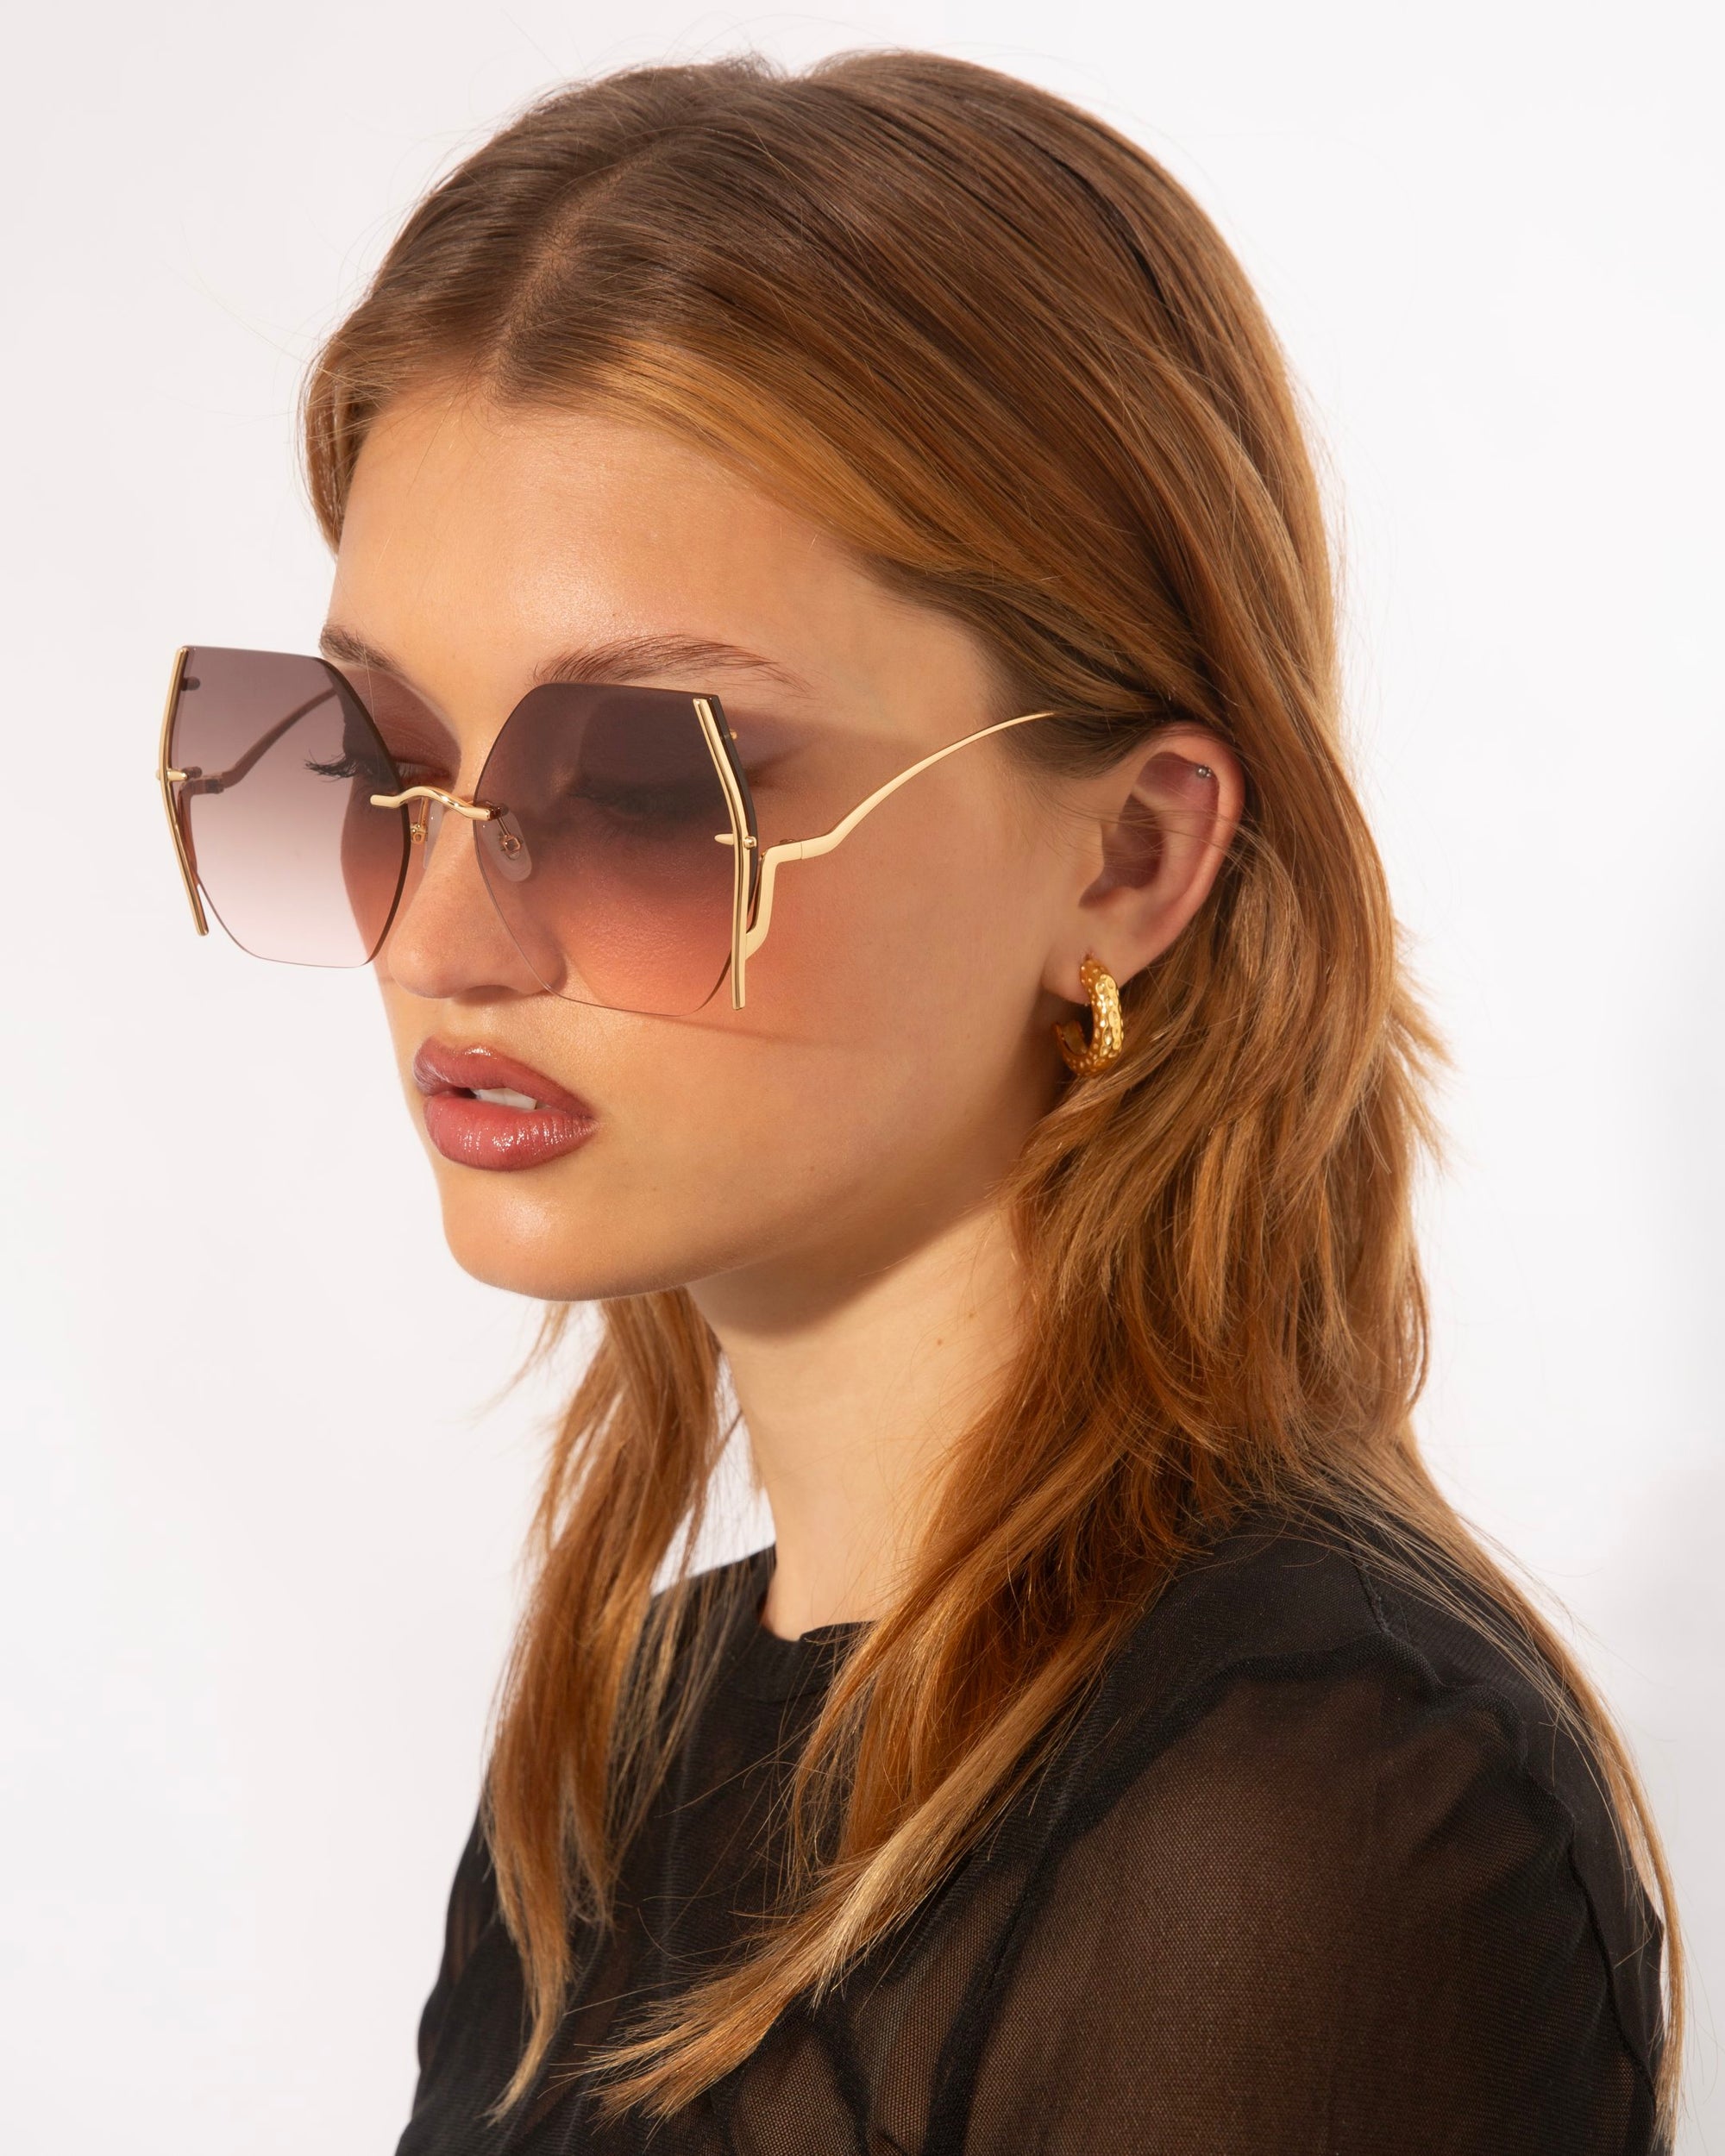 A person with long, light brown hair is wearing large, square-shaped For Art&#39;s Sake® Generation sunglasses with gold accents and gradient lenses offering UV protection. They are also wearing a black, semi-transparent top and a gold hoop earring. The background is plain white.